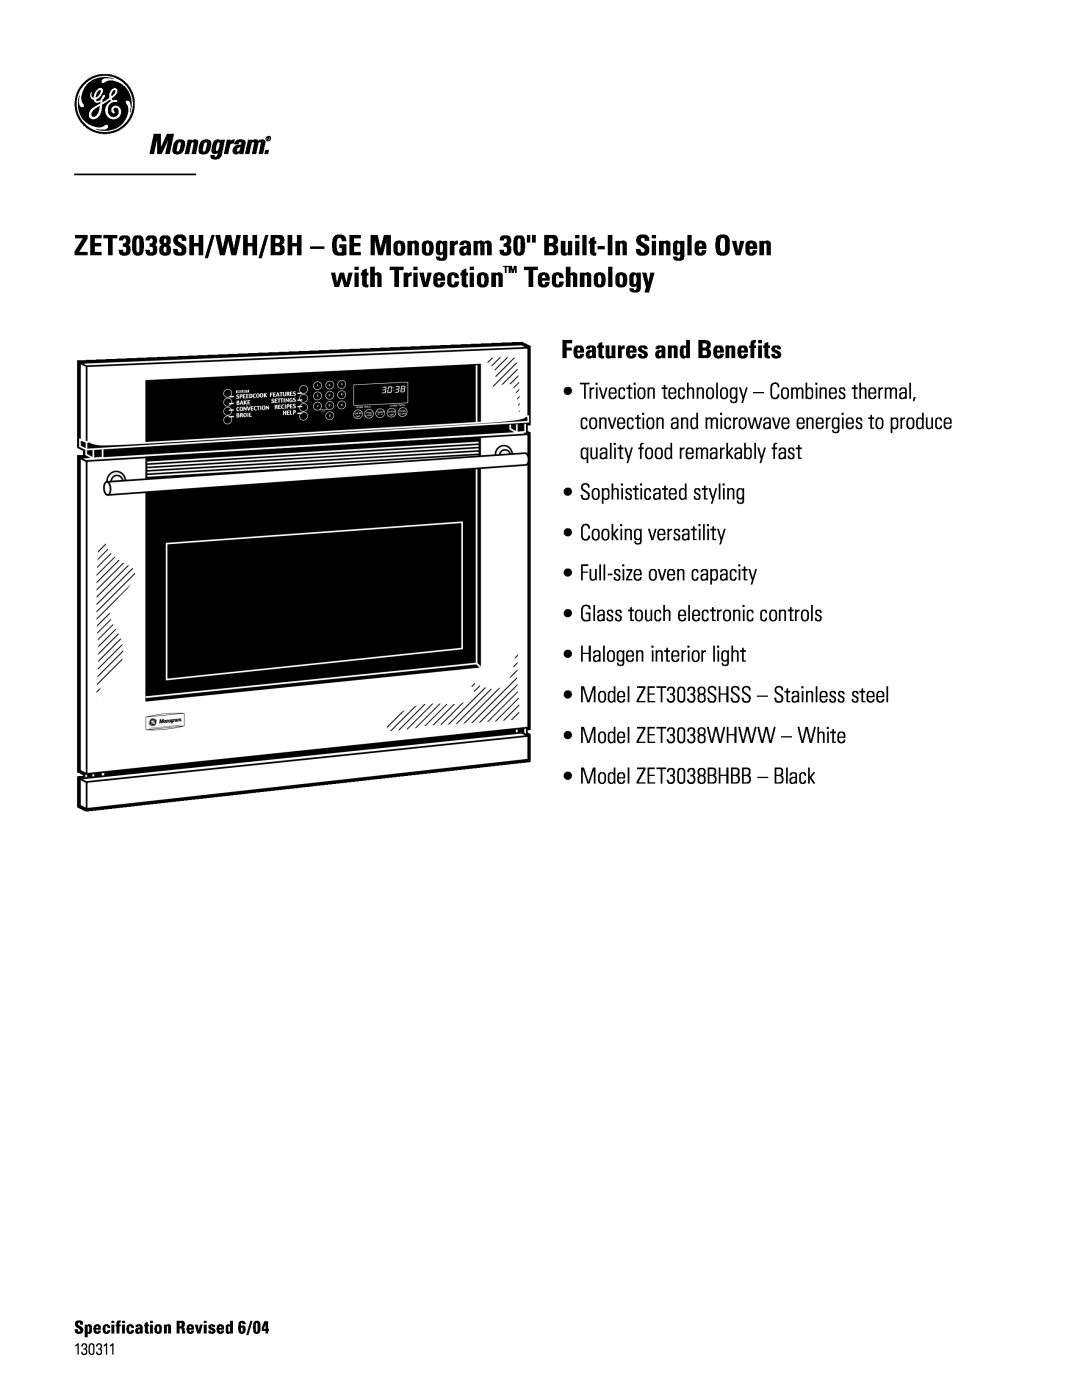 GE Monogram ZET3038SH/WH/BH dimensions Features and Benefits 